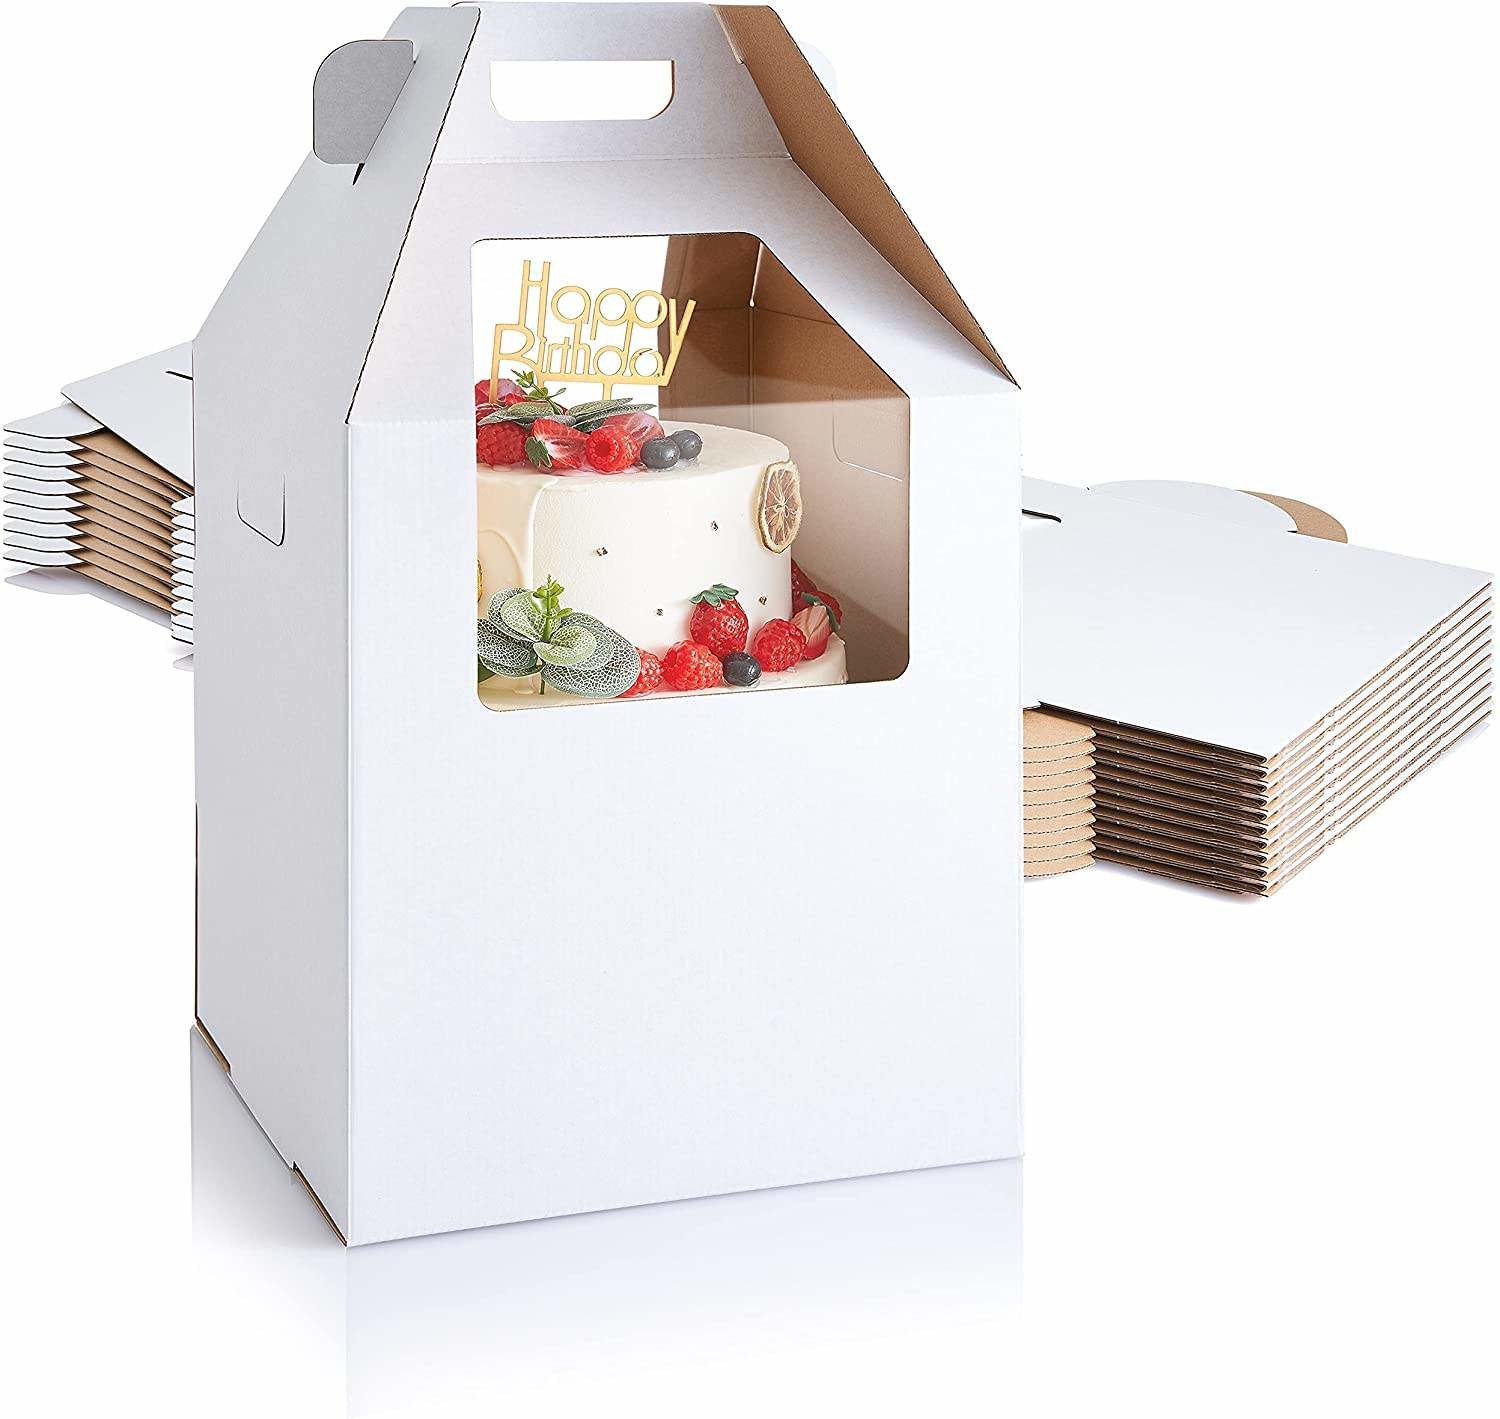 China Corrugated Wedding Tall Custom Cake Box Packaging With Two Window on sale